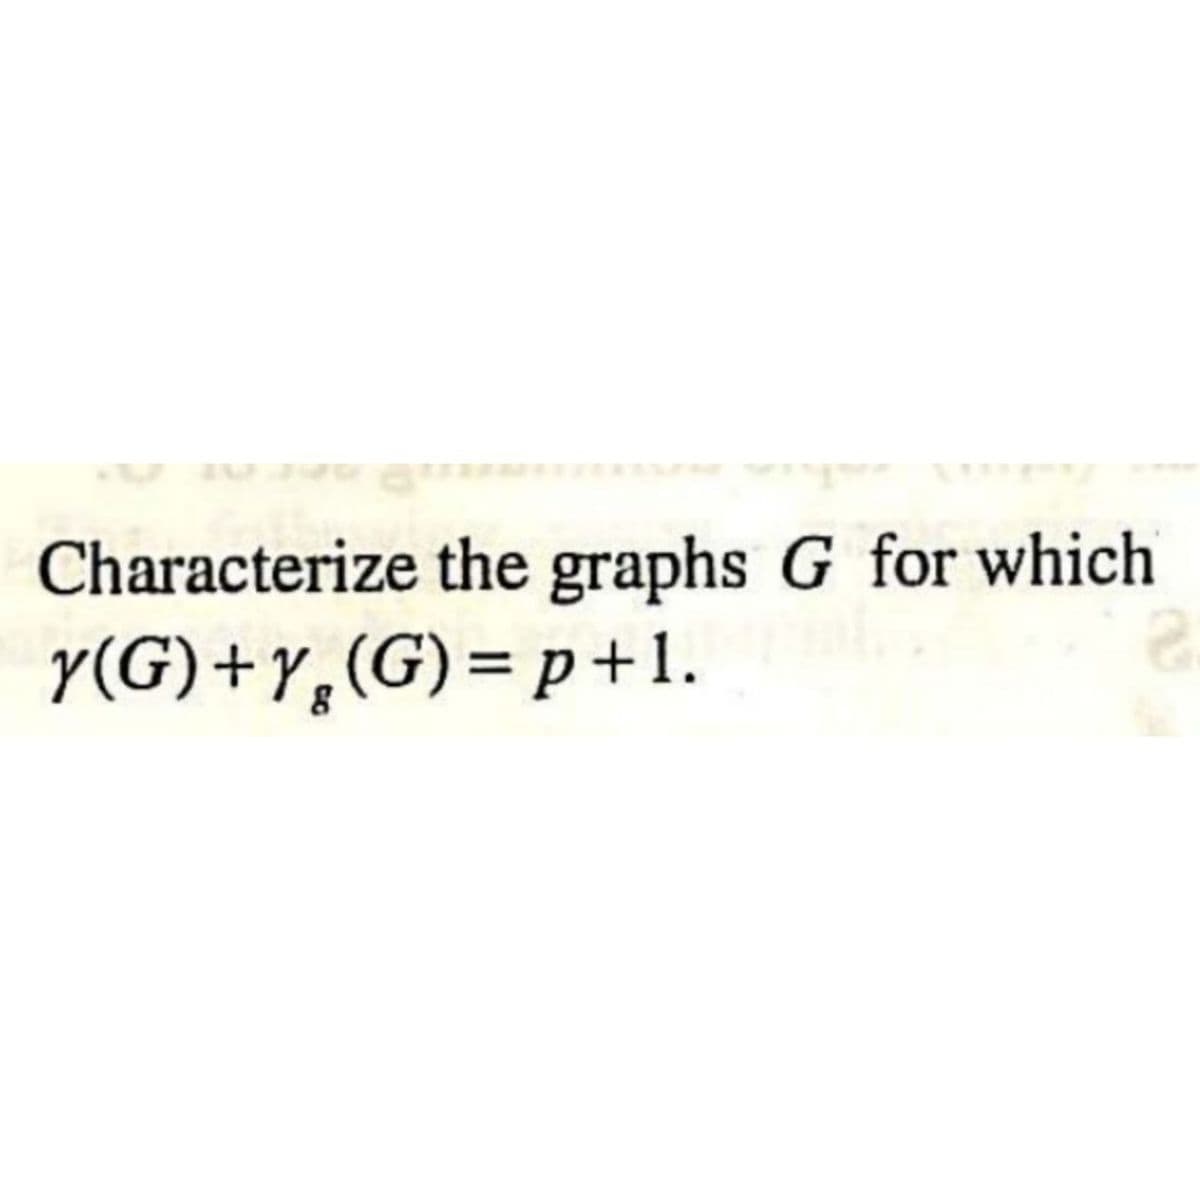 Characterize the graphs G for which
Y(G) + y₂ (G)=p+1.
8